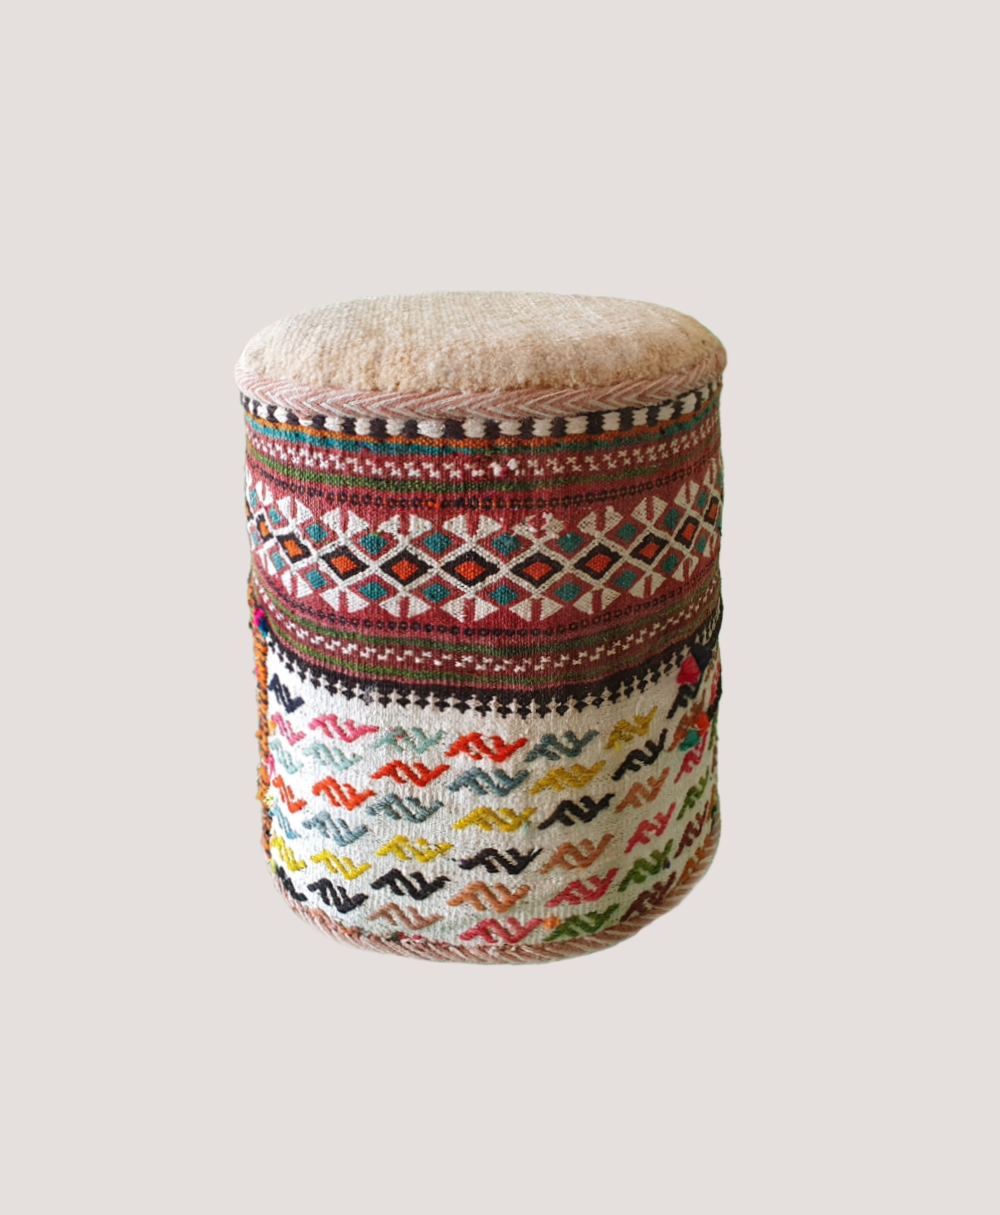 Afshar Cylindrical Coffer 6 stools or sidetables 2